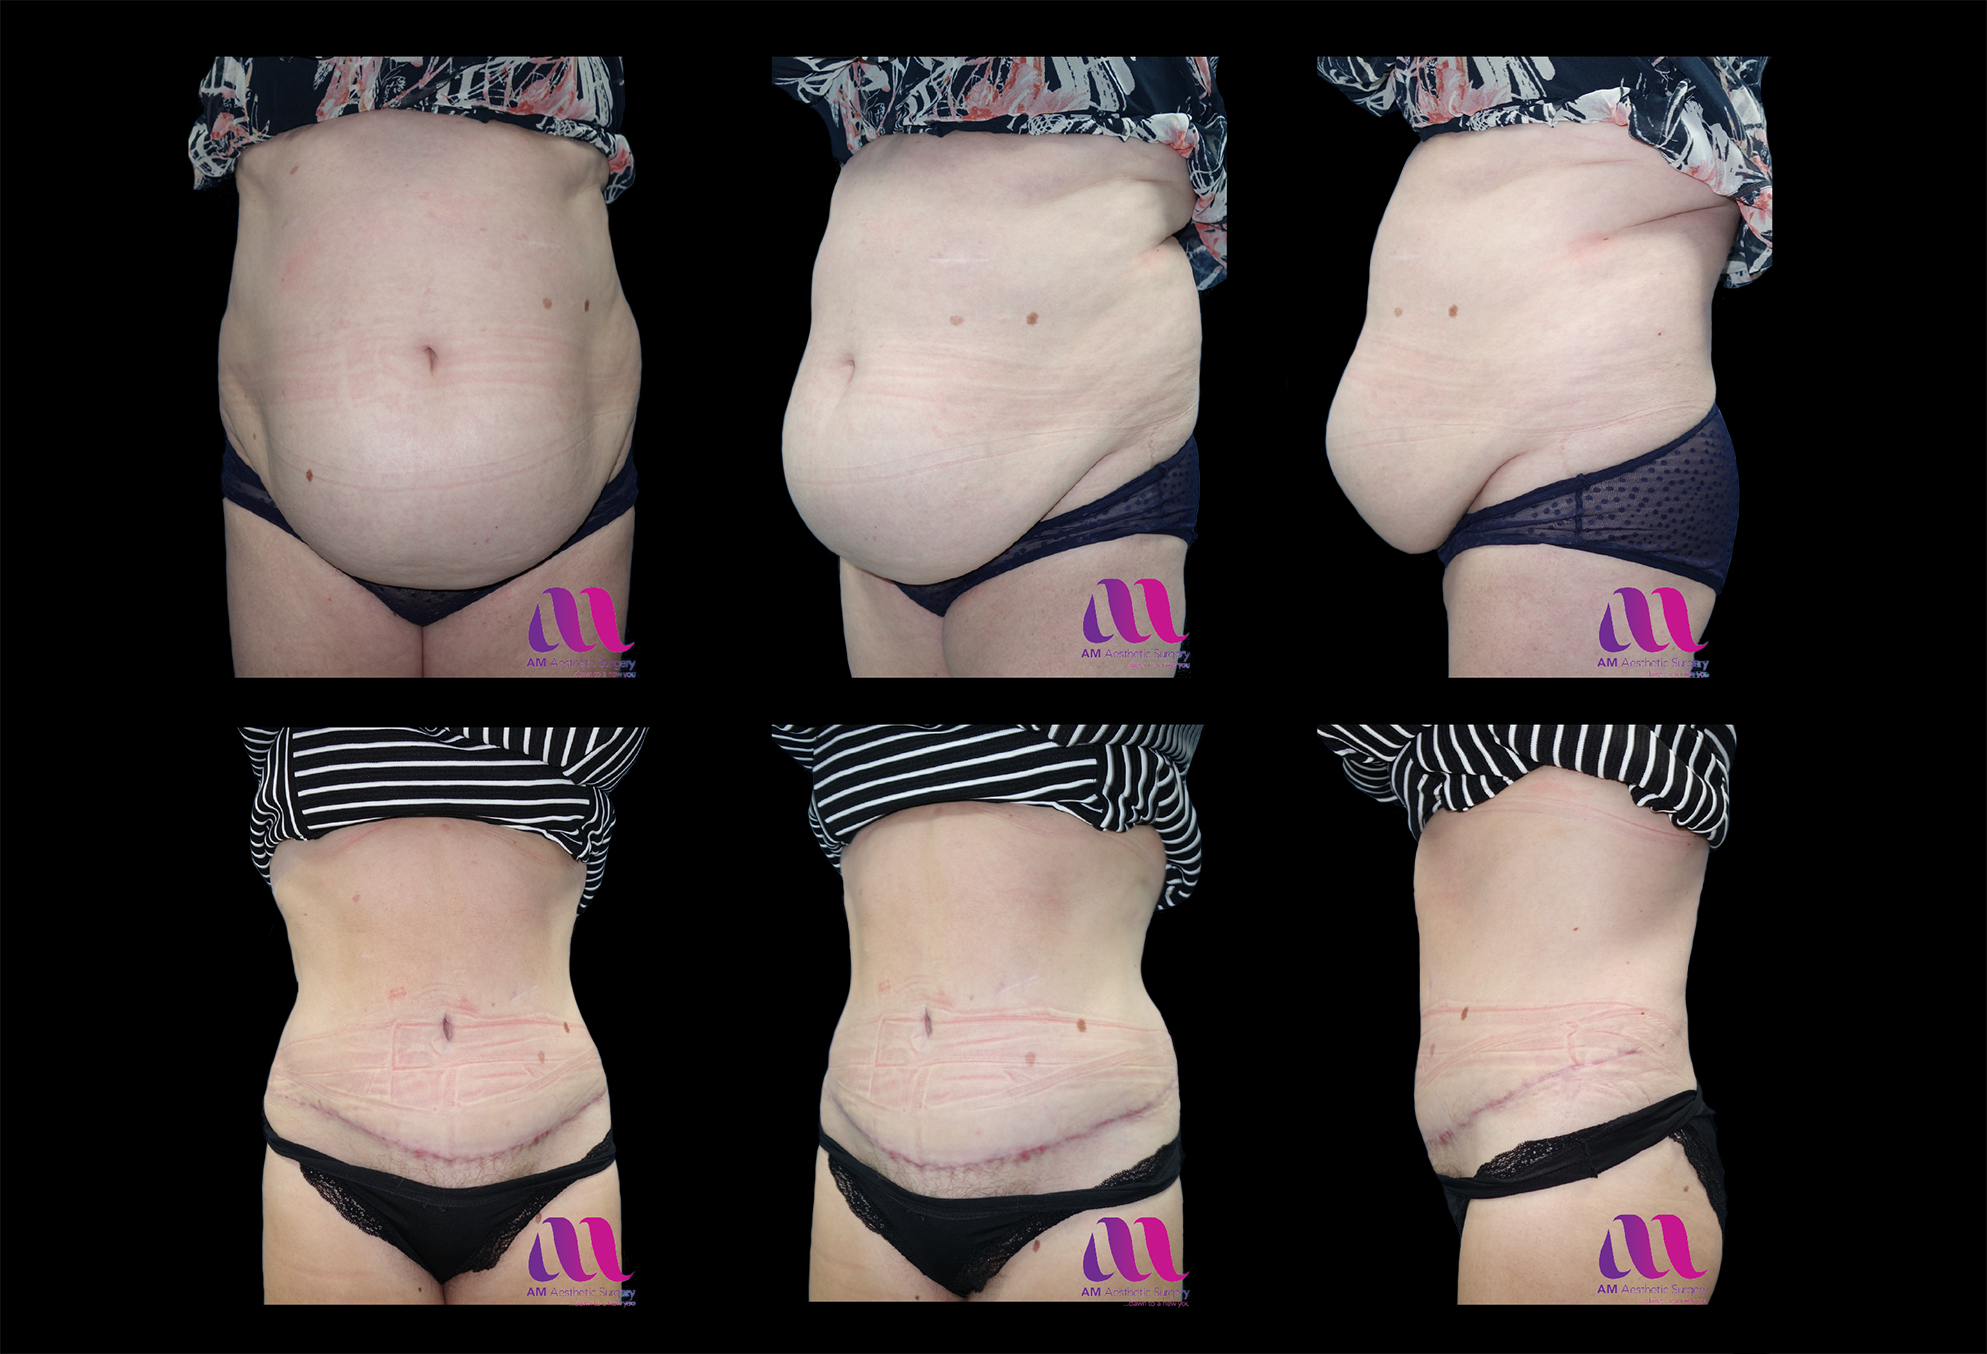 8 days post op Tummy Tuck, the swelling and tightness increasing instead of  decreasing. Is this normal? (photo)